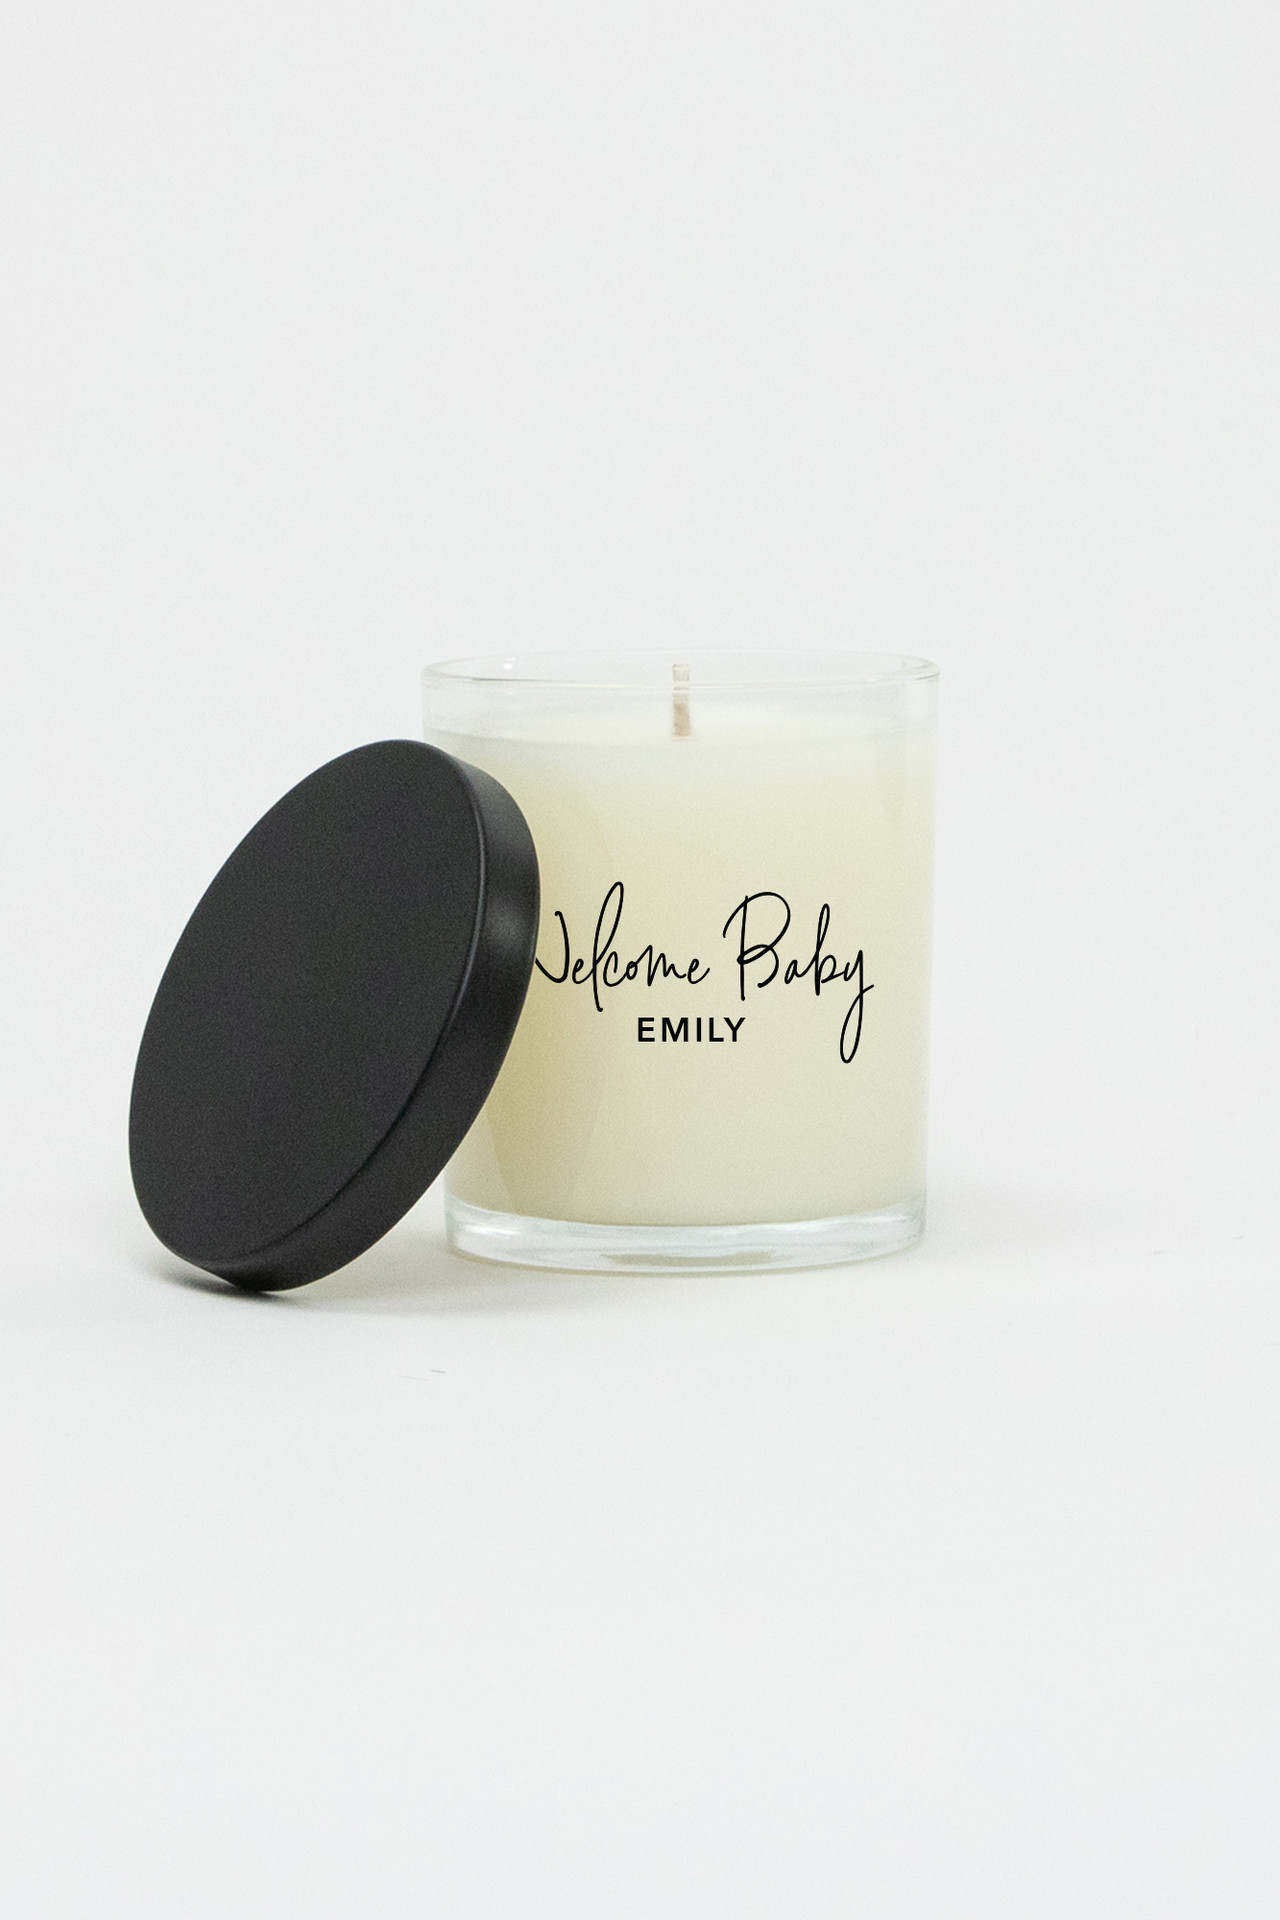 Welcome Baby Personalized Soy Candle - 10oz Black